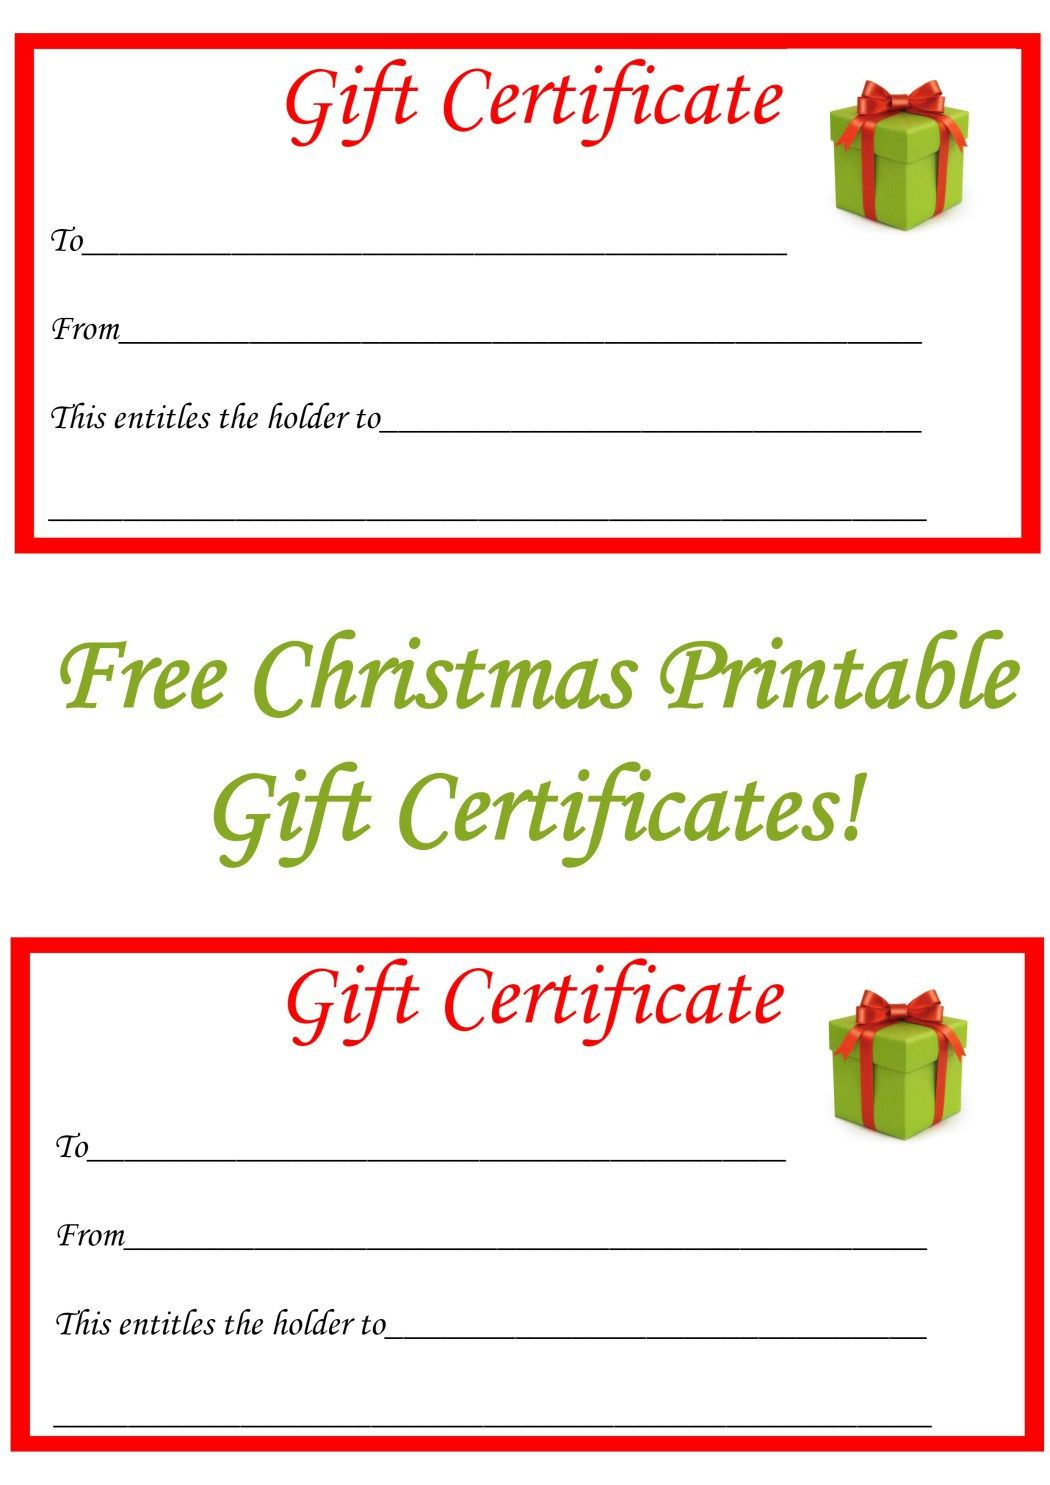 010 Template Ideas Blank Gift Astounding Certificate With Regard To Christmas Gift Certificate Template Free Download